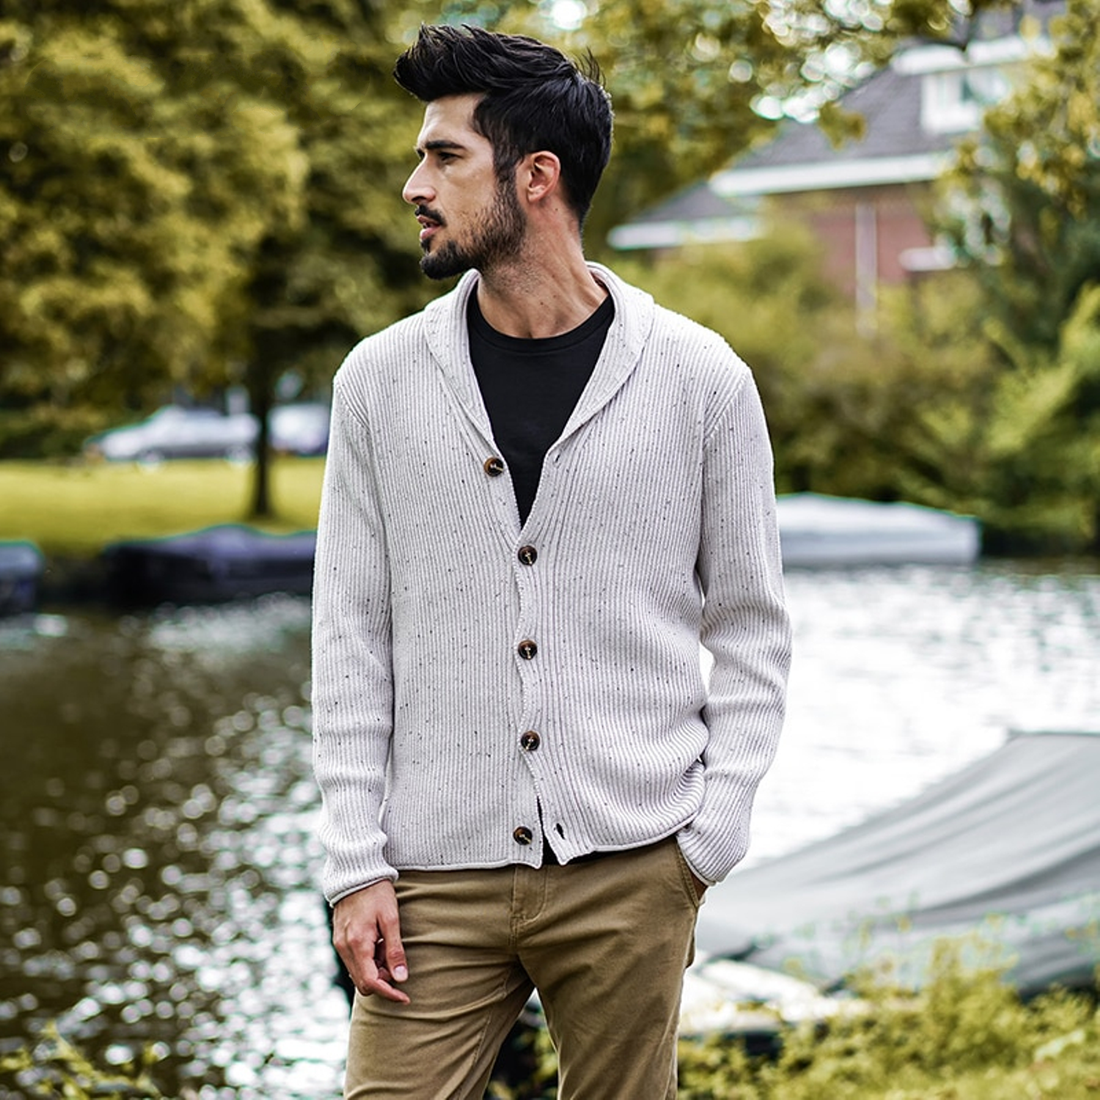 Men's Autumn/Winter Casual Slim Knitted Cardigan